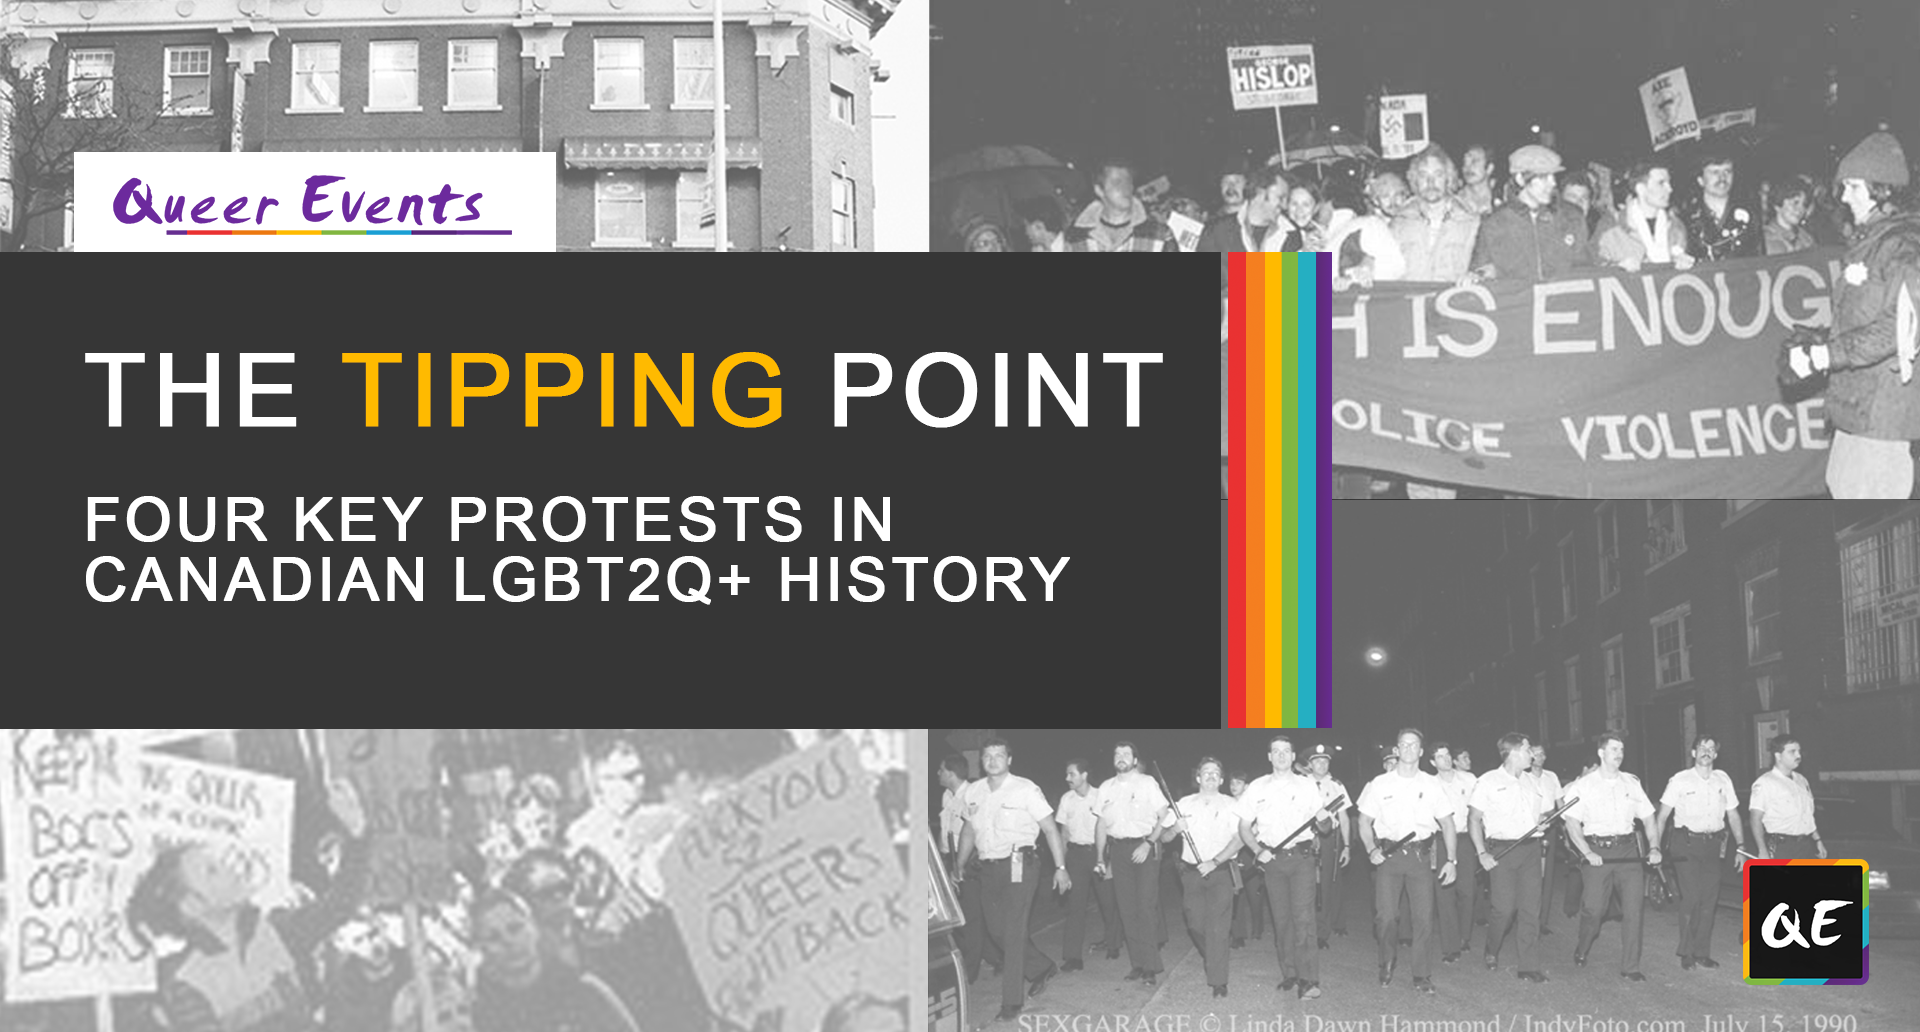 QueerEvents.ca - Queer History - Four Key Protest in Canadian LGBT2Q History